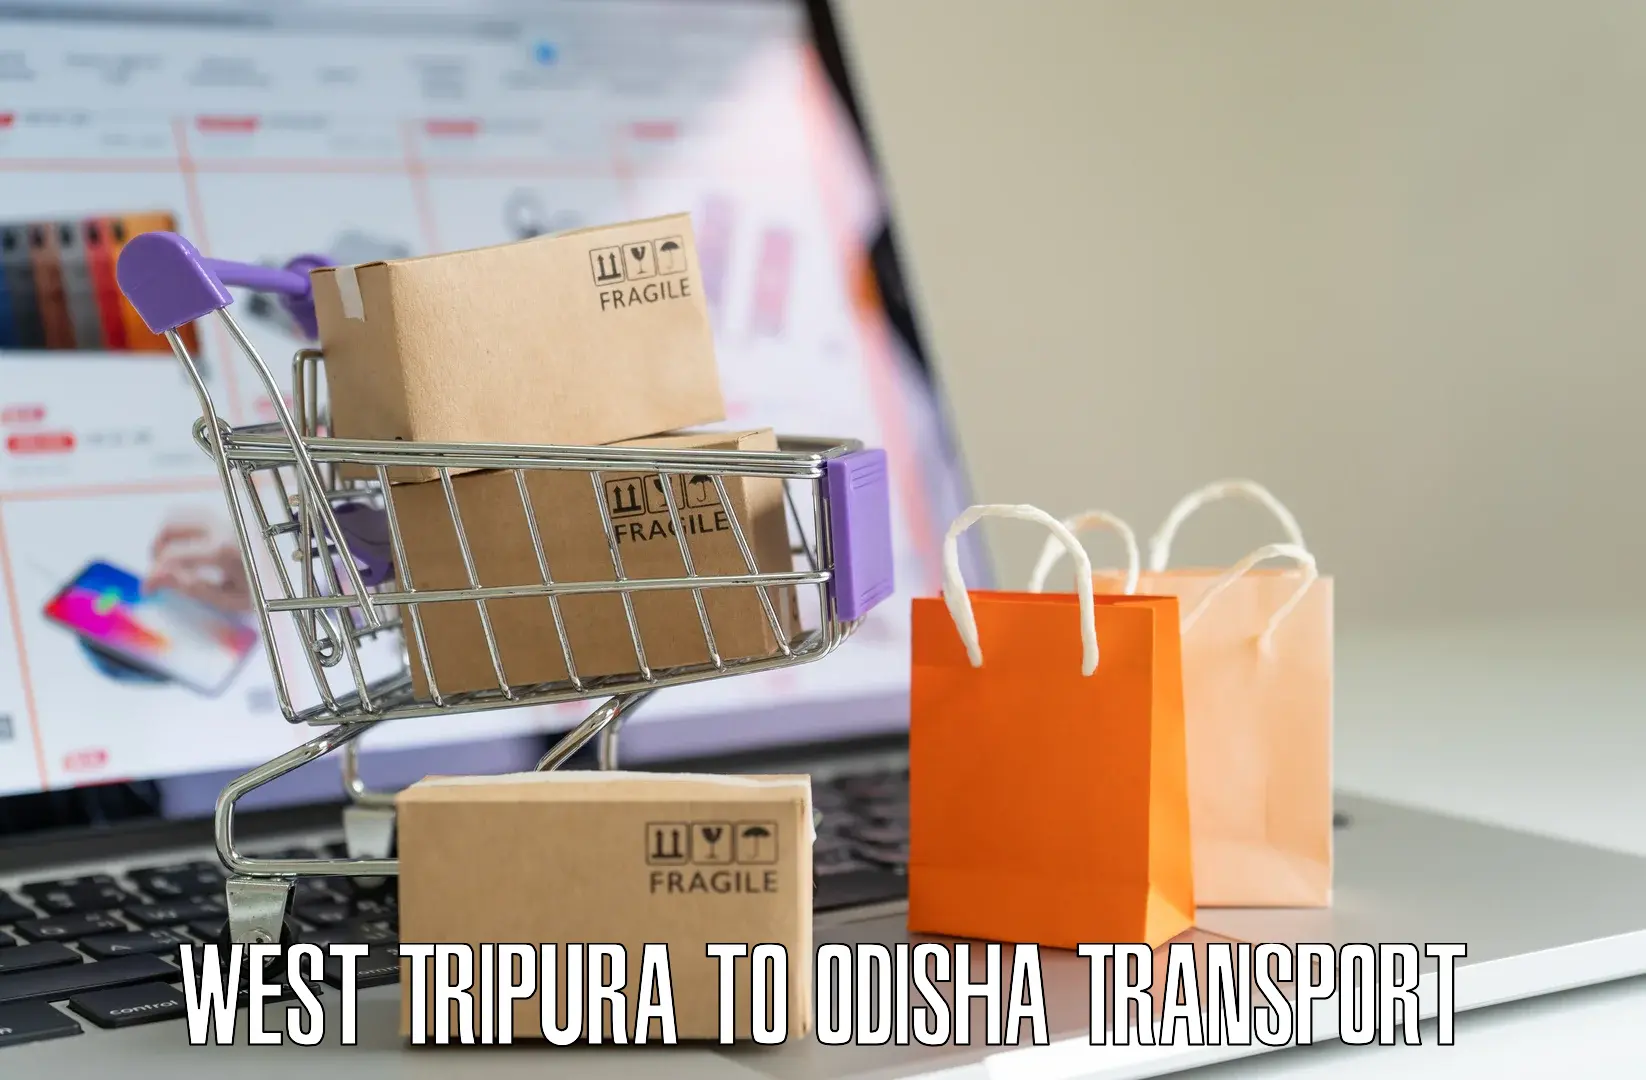 Material transport services West Tripura to Bhubaneswar